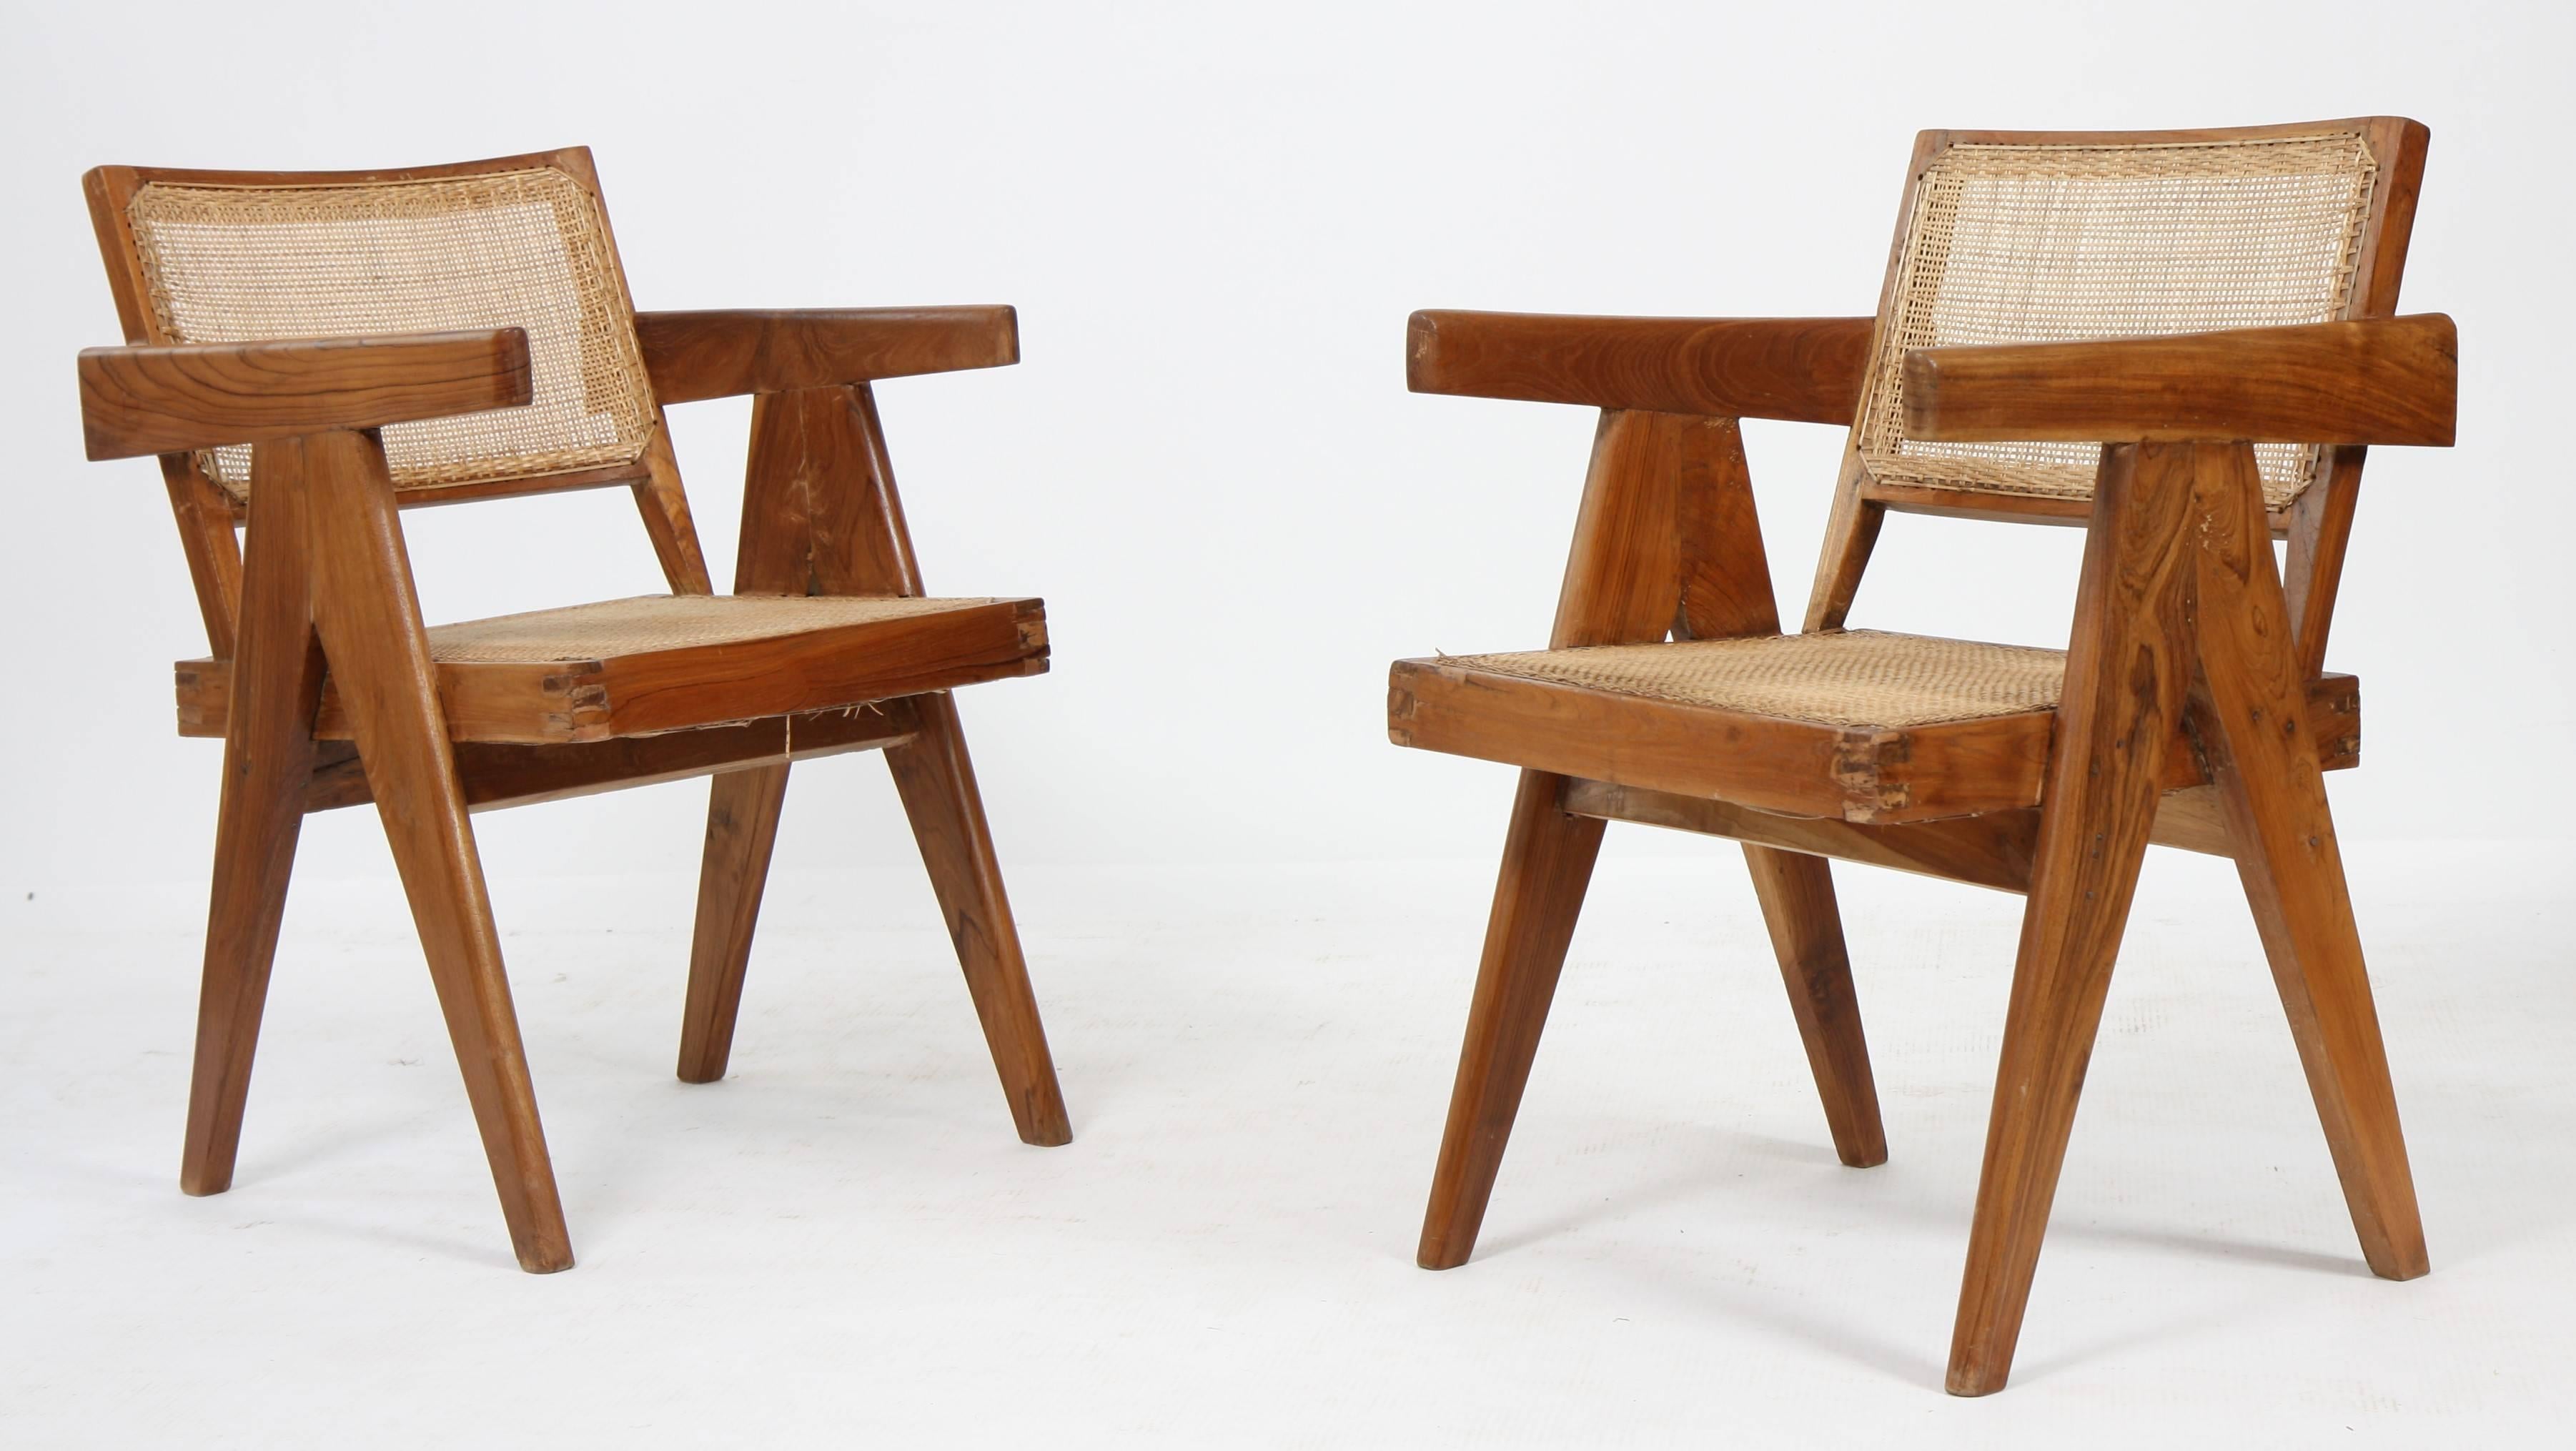 Pierre Jeanneret (1896-1967).

Set of two armchairs called 